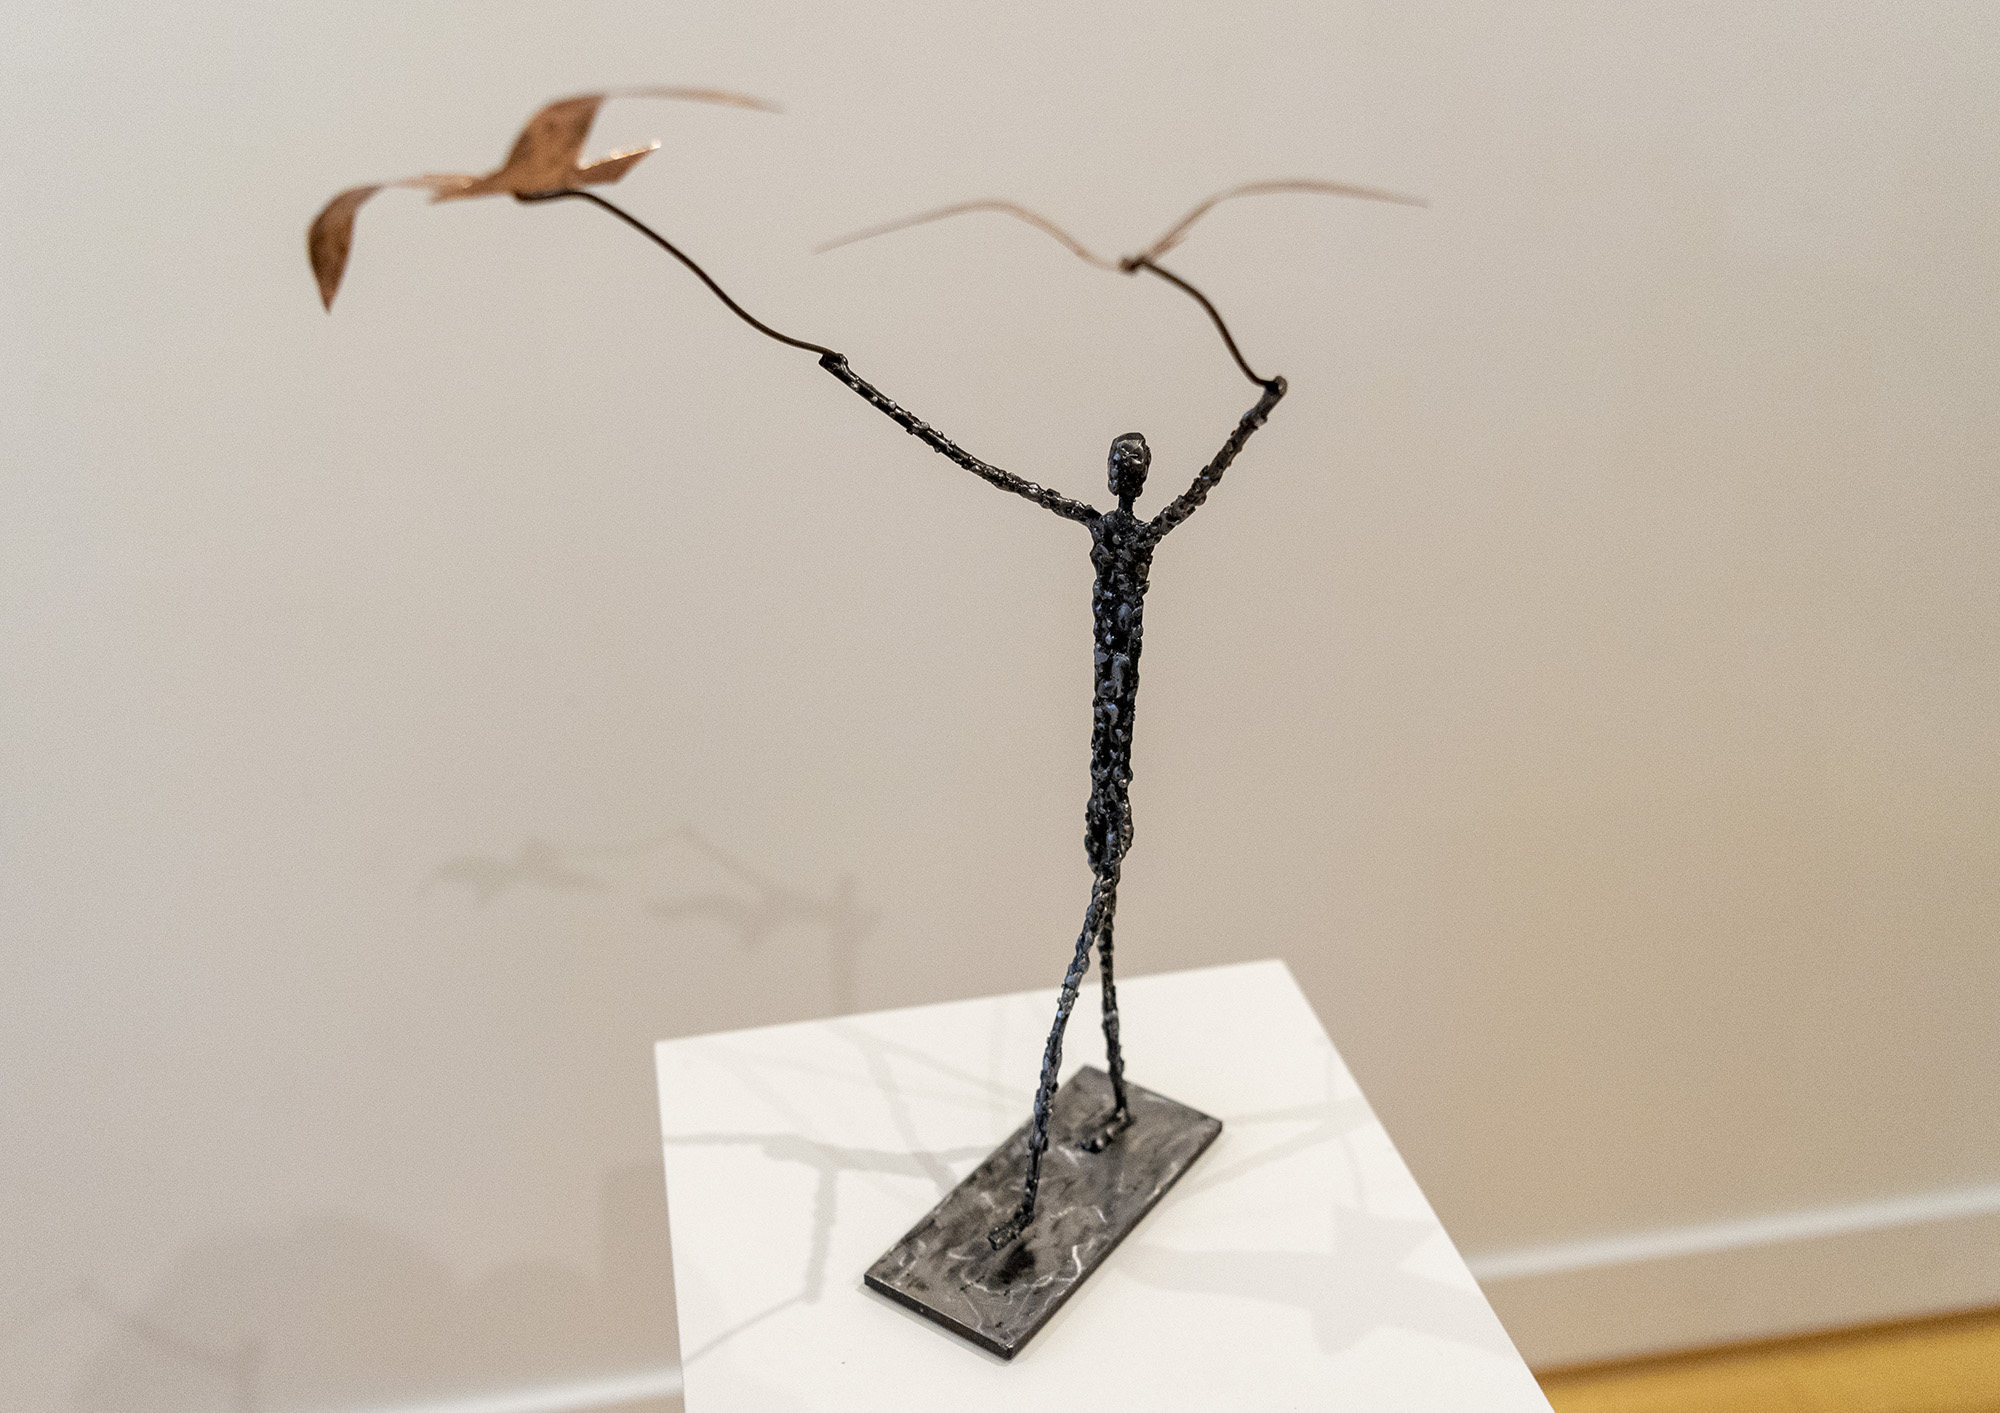 “Walking the Birds,” a sculpture by Bill Leigh made from reclaimed BBQ grate, a copper fire bowl and scrap steel sits on a pedestal Tuesday, Jan. 11, 2022, at Art at the Cave gallery in Vancouver. Leigh’s exhibit, “Trash to Treasure,” runs through Jan. 29.